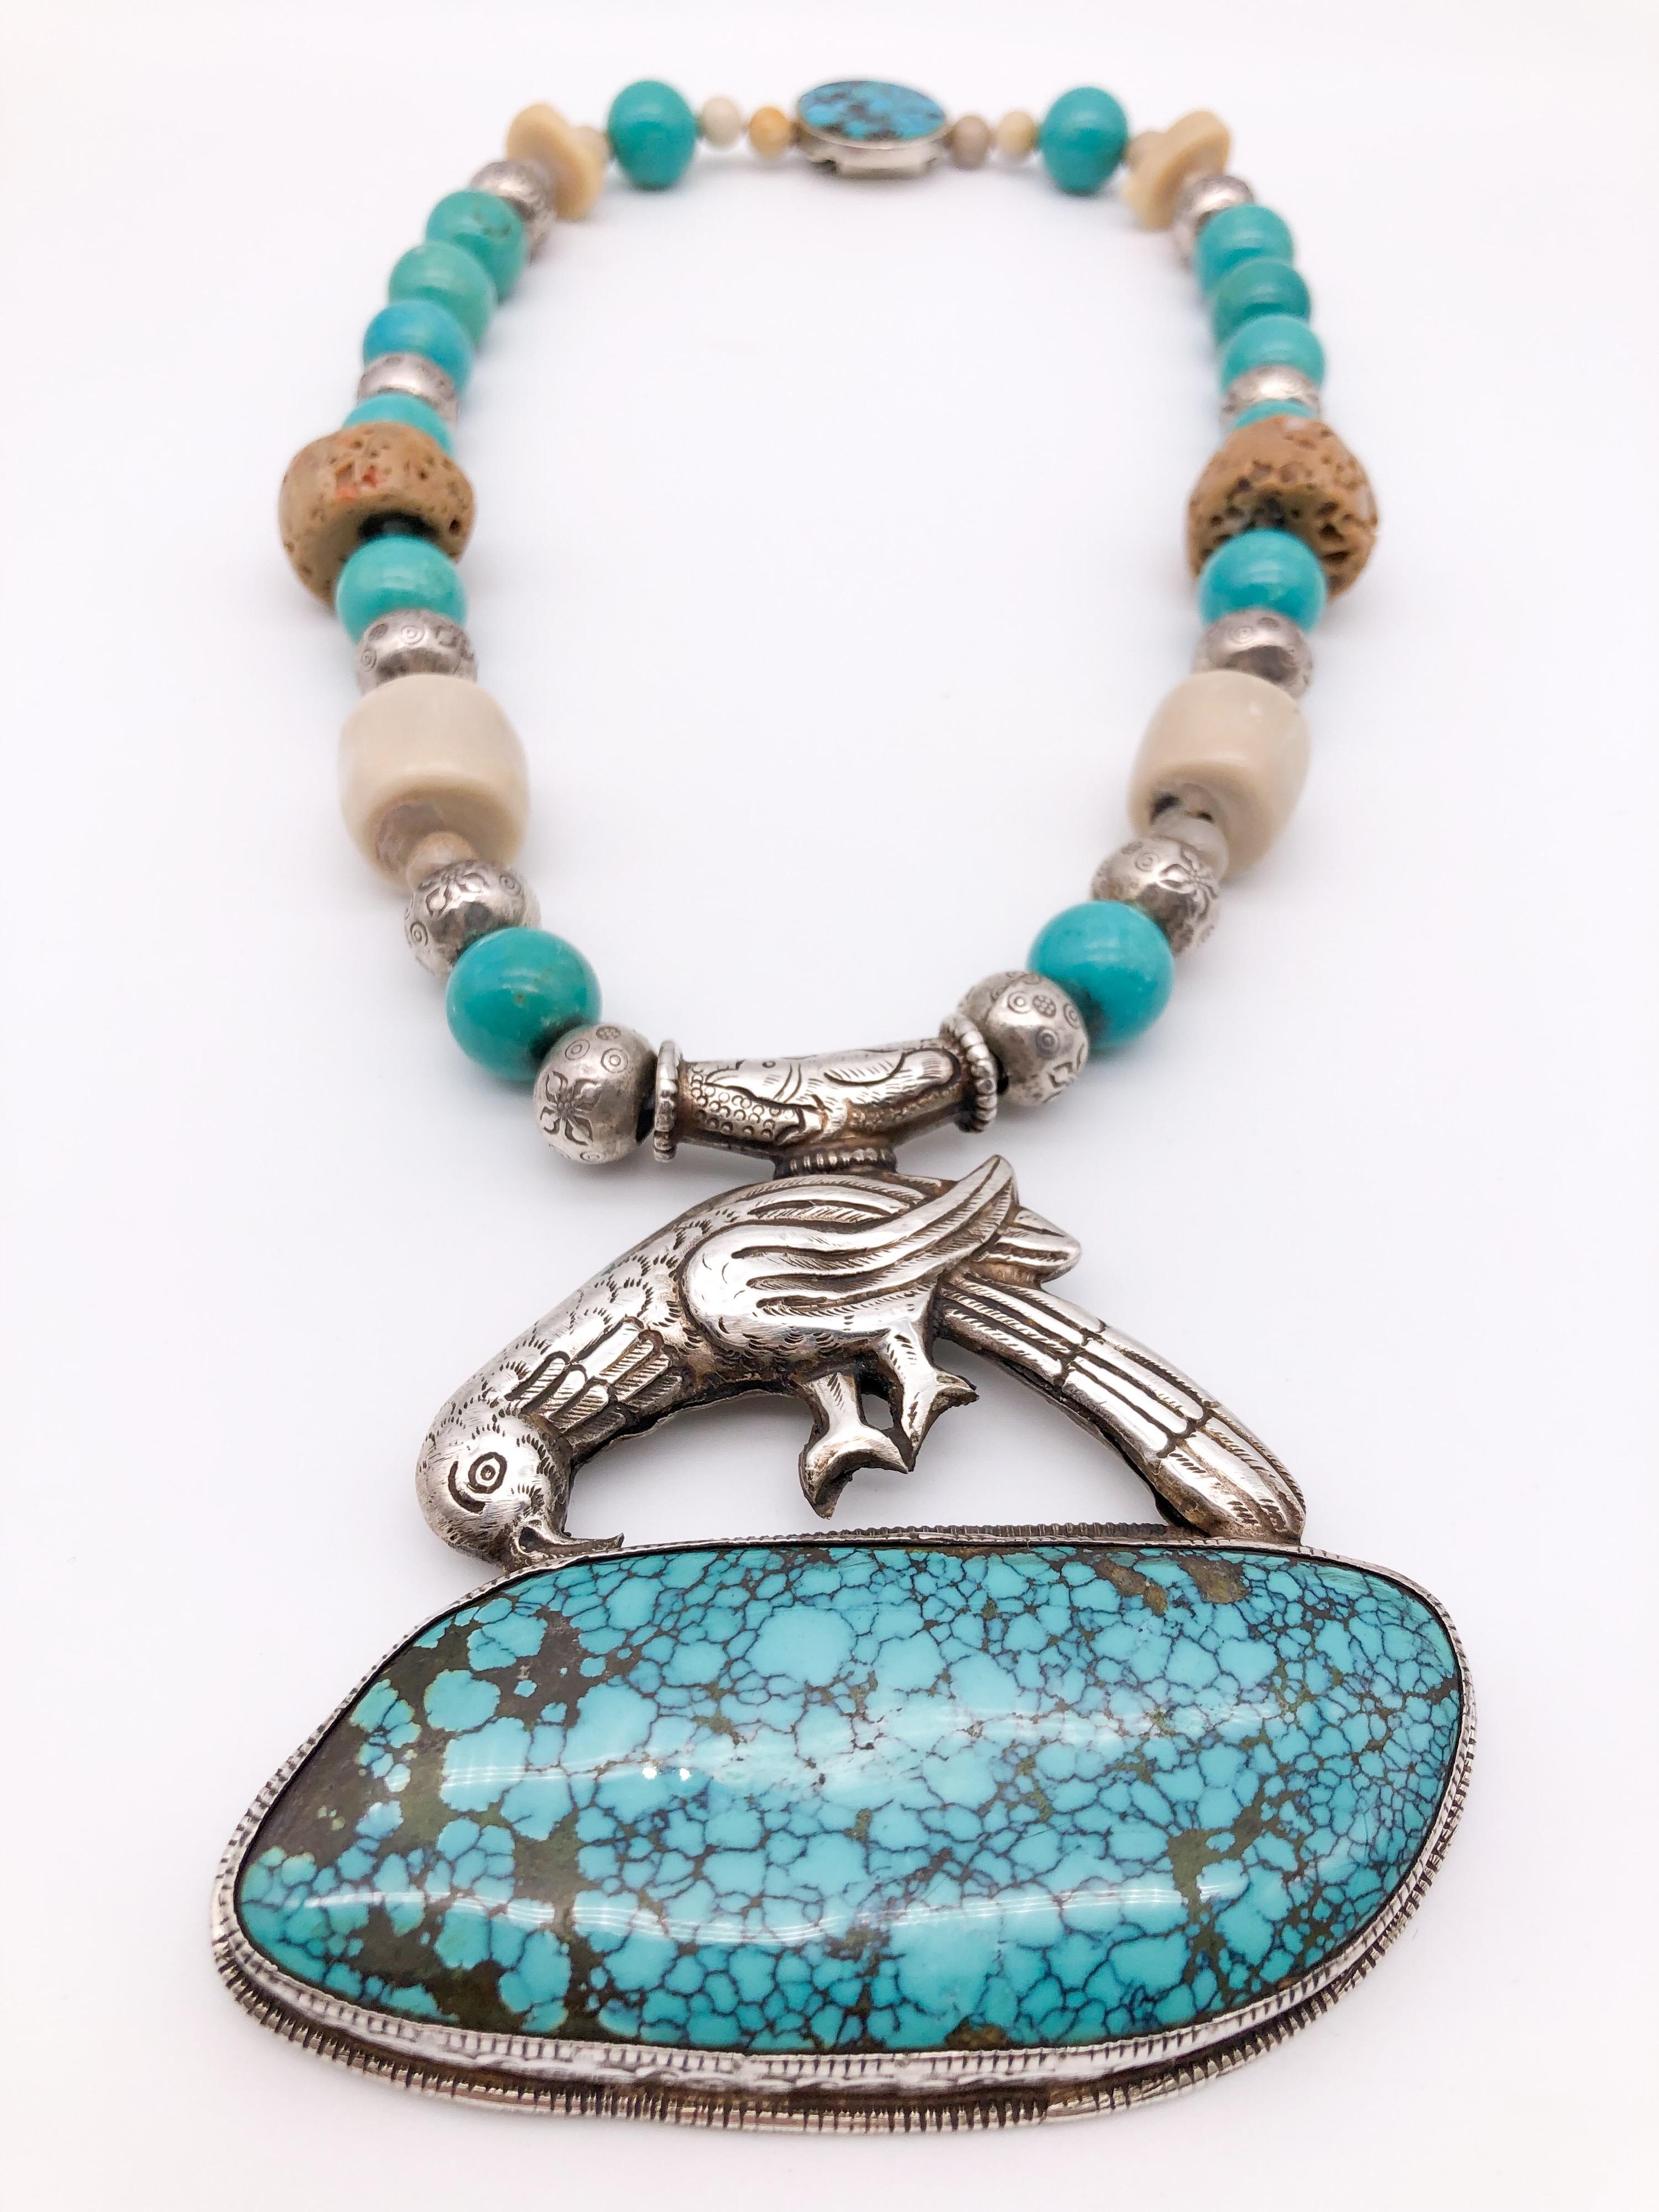 Women's A.Jeschel Turquoise and Ethnic beads necklace with Tibetan Silver Bird Pendant   For Sale